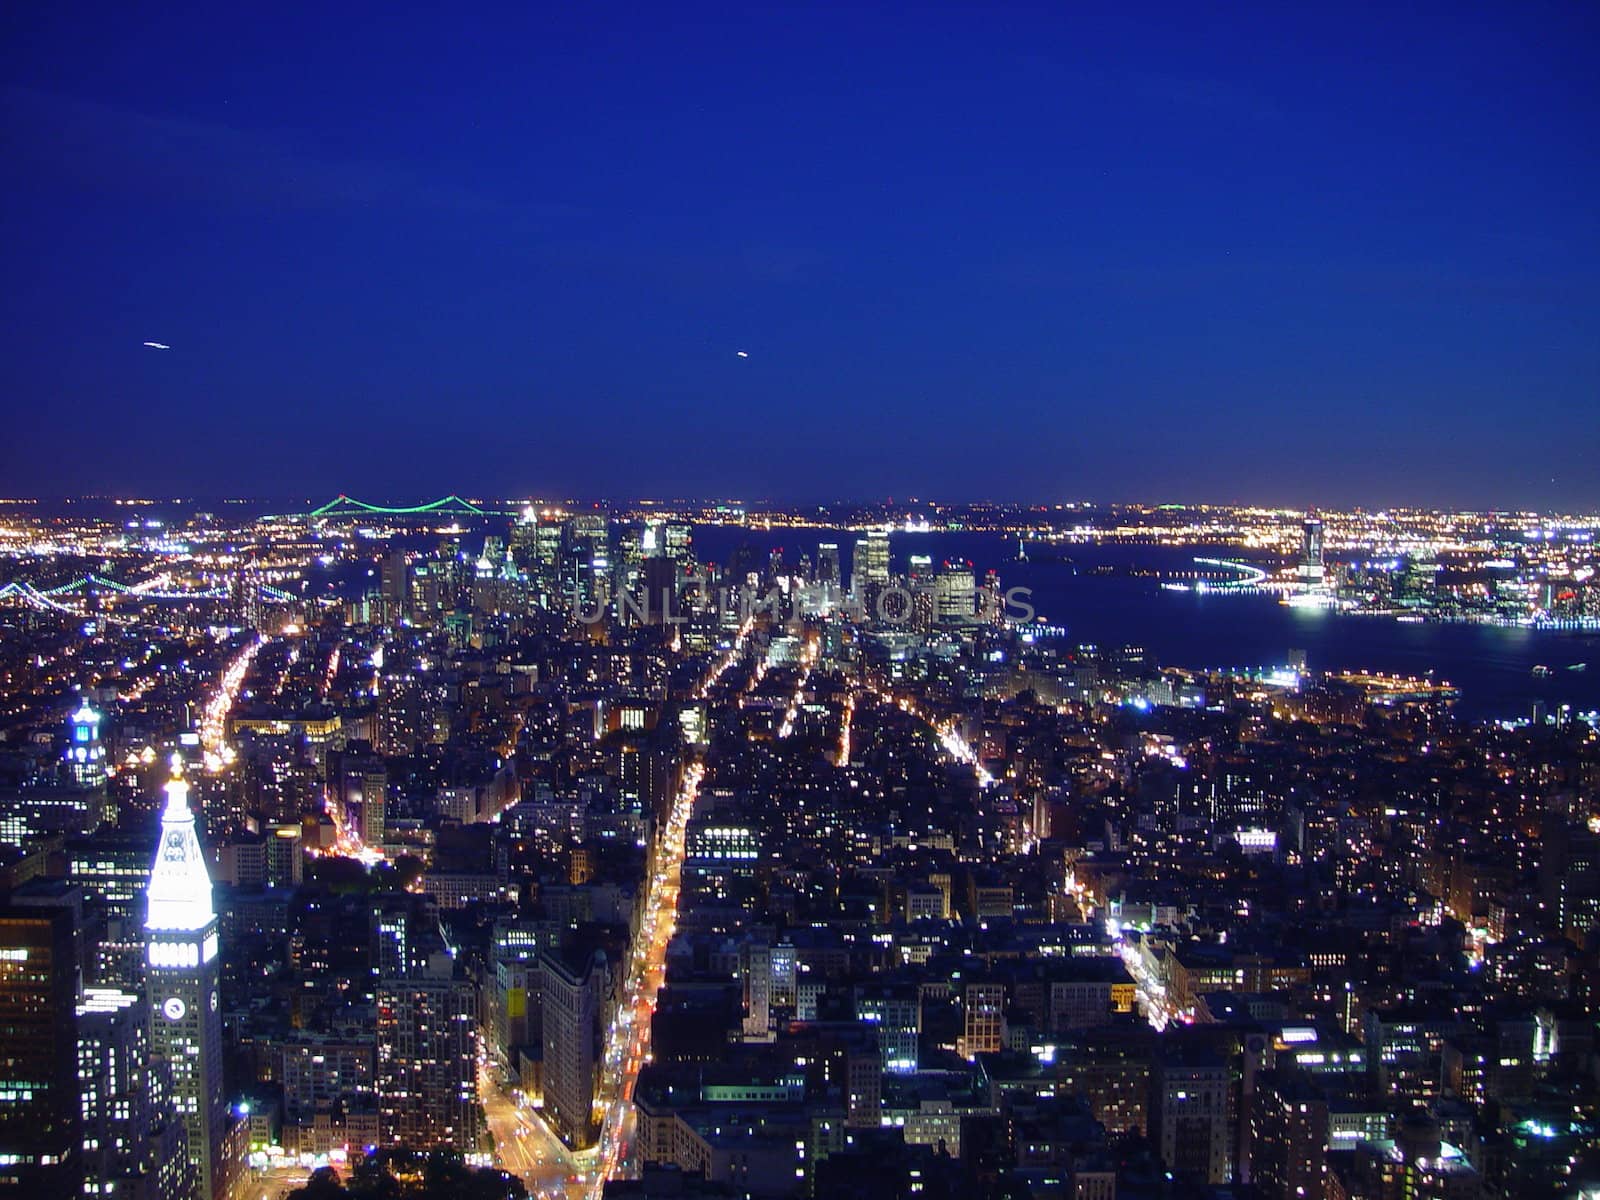 An aerial view of New York City at night.